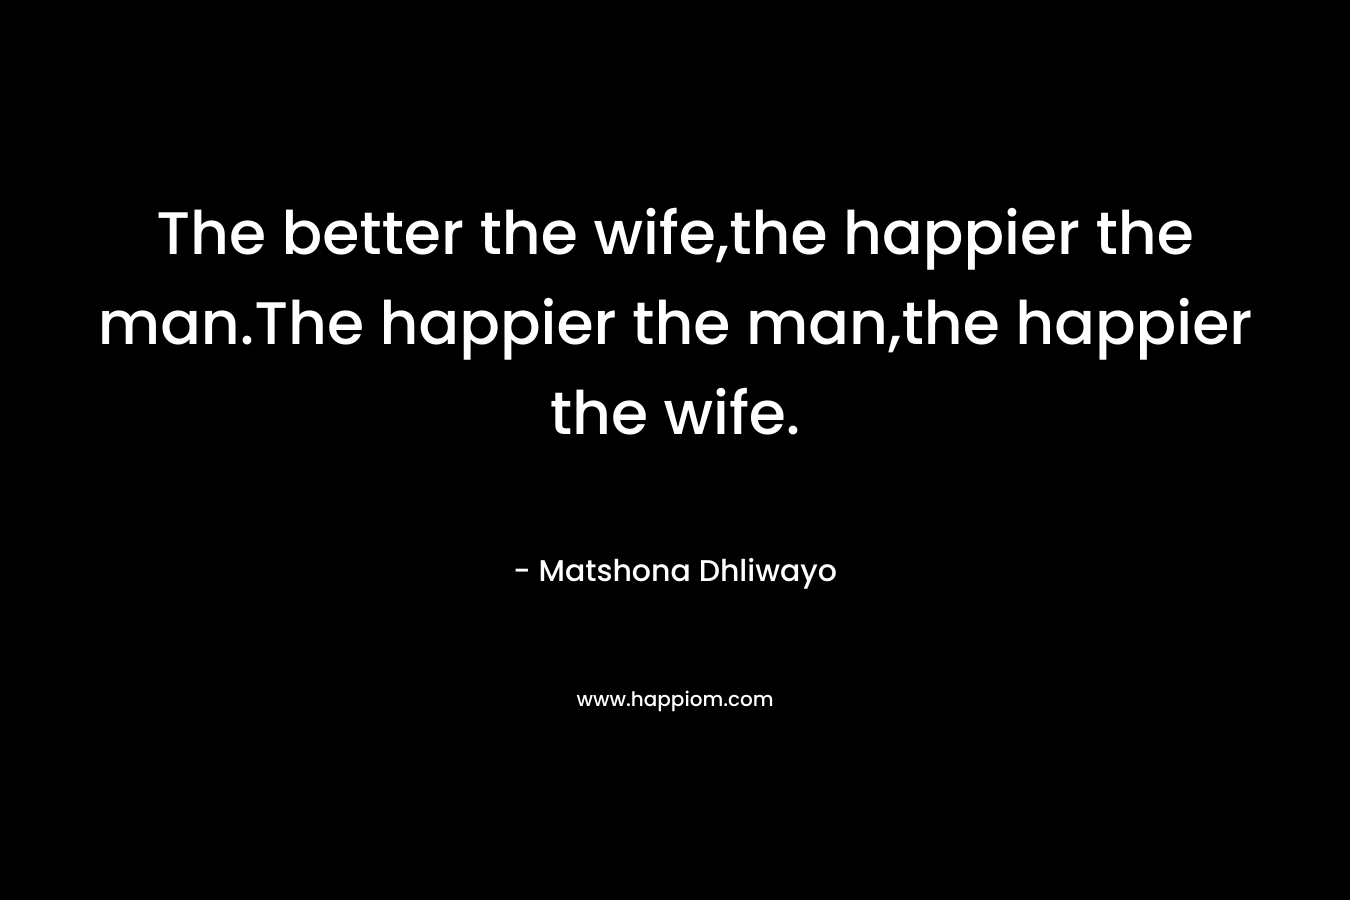 The better the wife,the happier the man.The happier the man,the happier the wife.